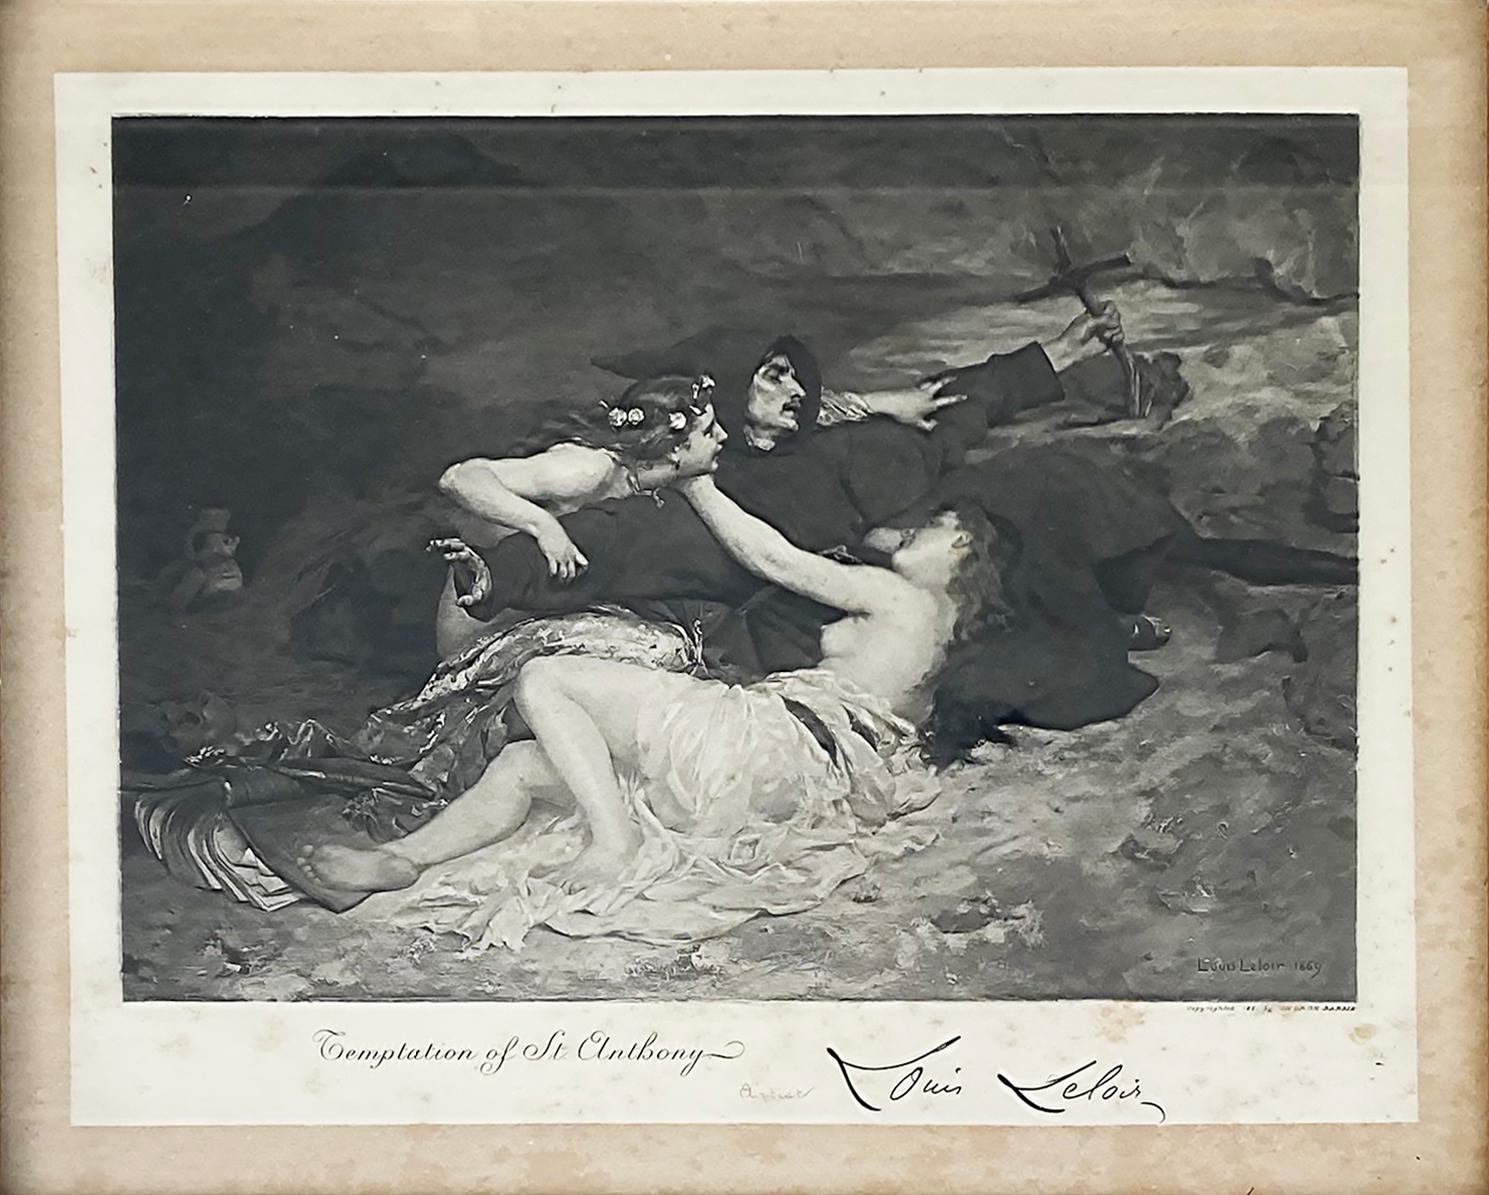 Antique Alexandre Louis Leloir Engraving of the Temptation of St. Anthony 

Offered for sale is an engraving of the original oil painting by Alexandre-Louis Leloir (1843-1884).   Leloir was a renowned French painter specializing in genre and